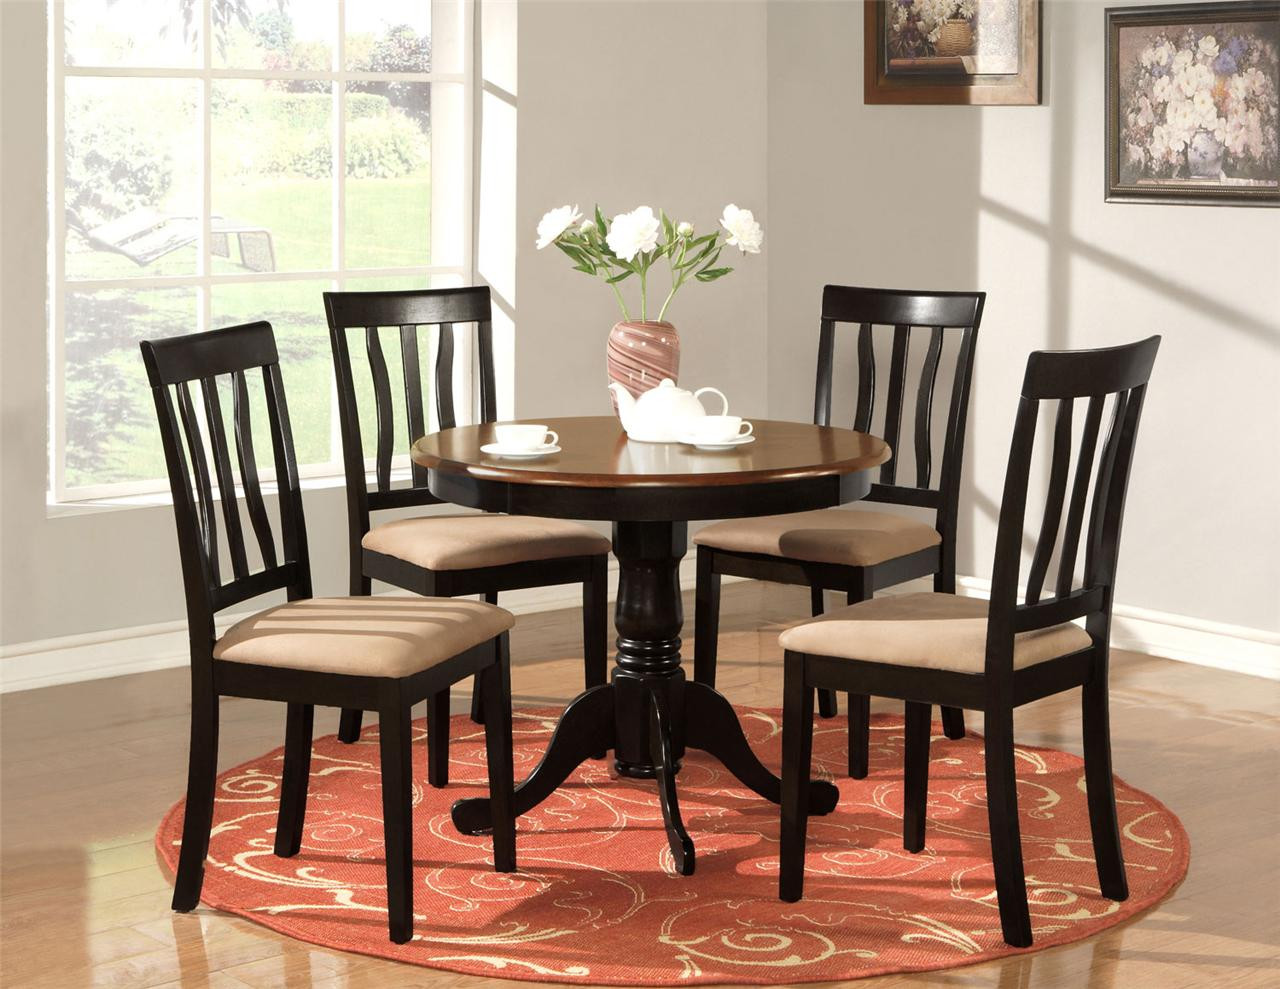 Small Round Kitchen Table
 Square vs Round Kitchen Tables What to Choose Traba Homes